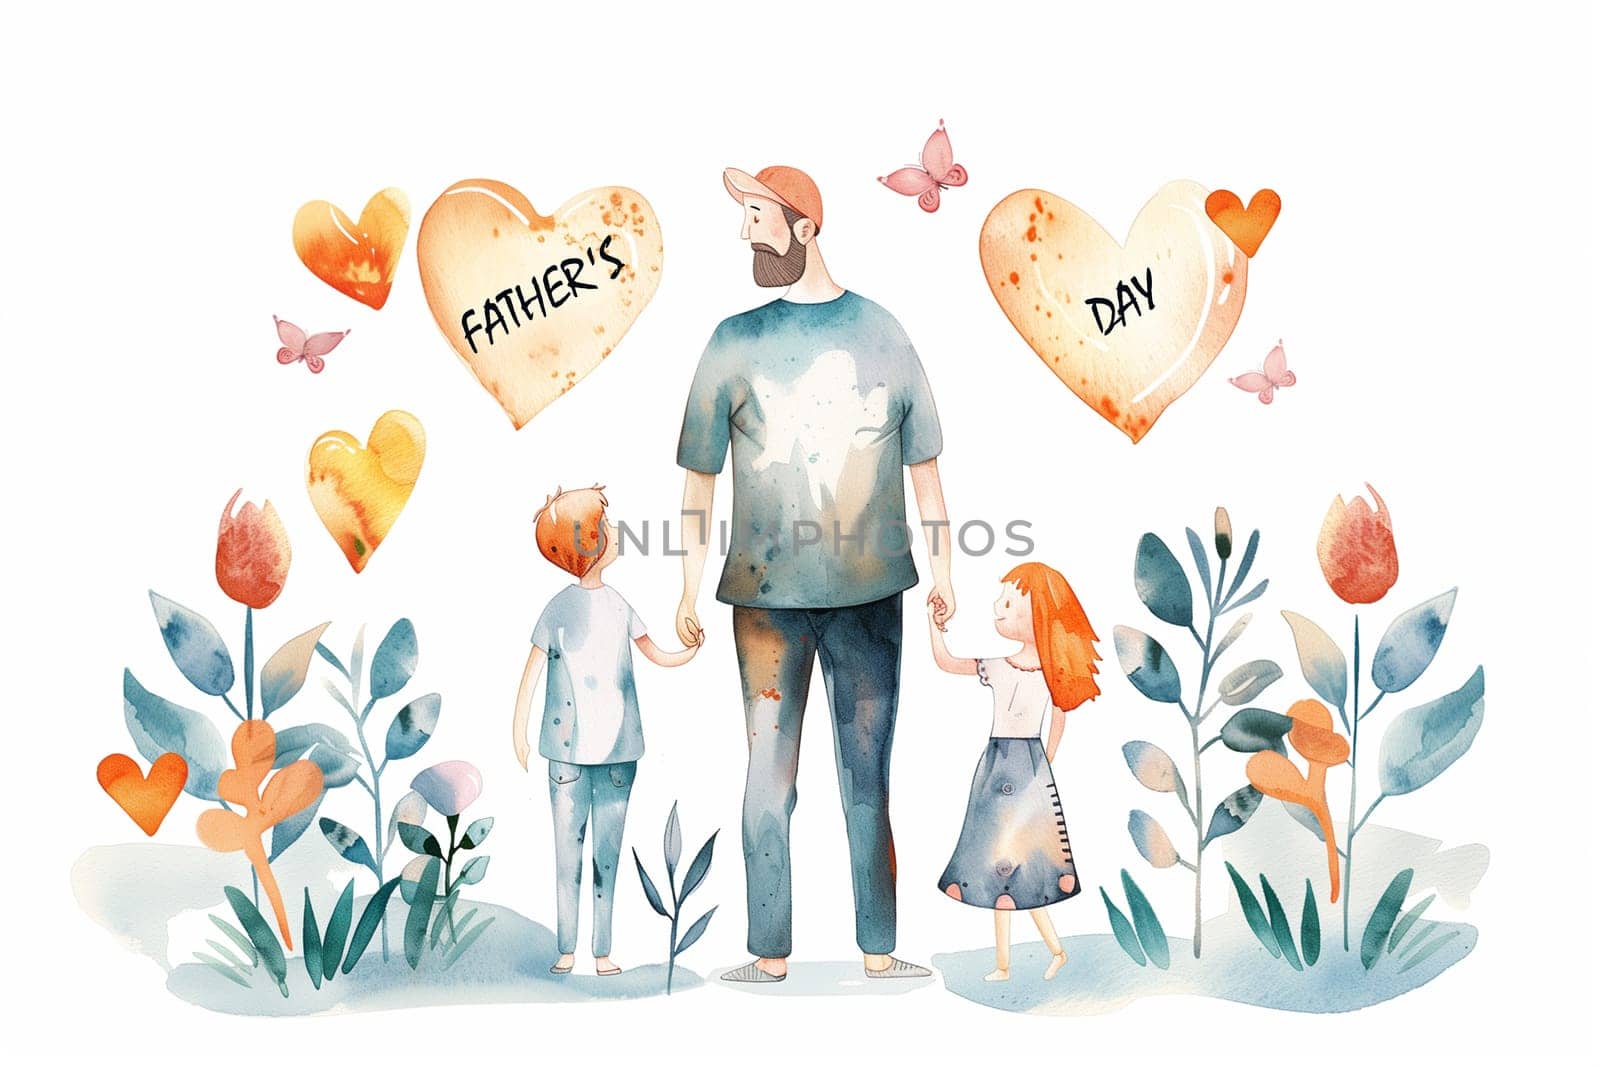 A watercolor painting depicting a father and daughter holding hands, showcasing a tender moment of familial connection and love.